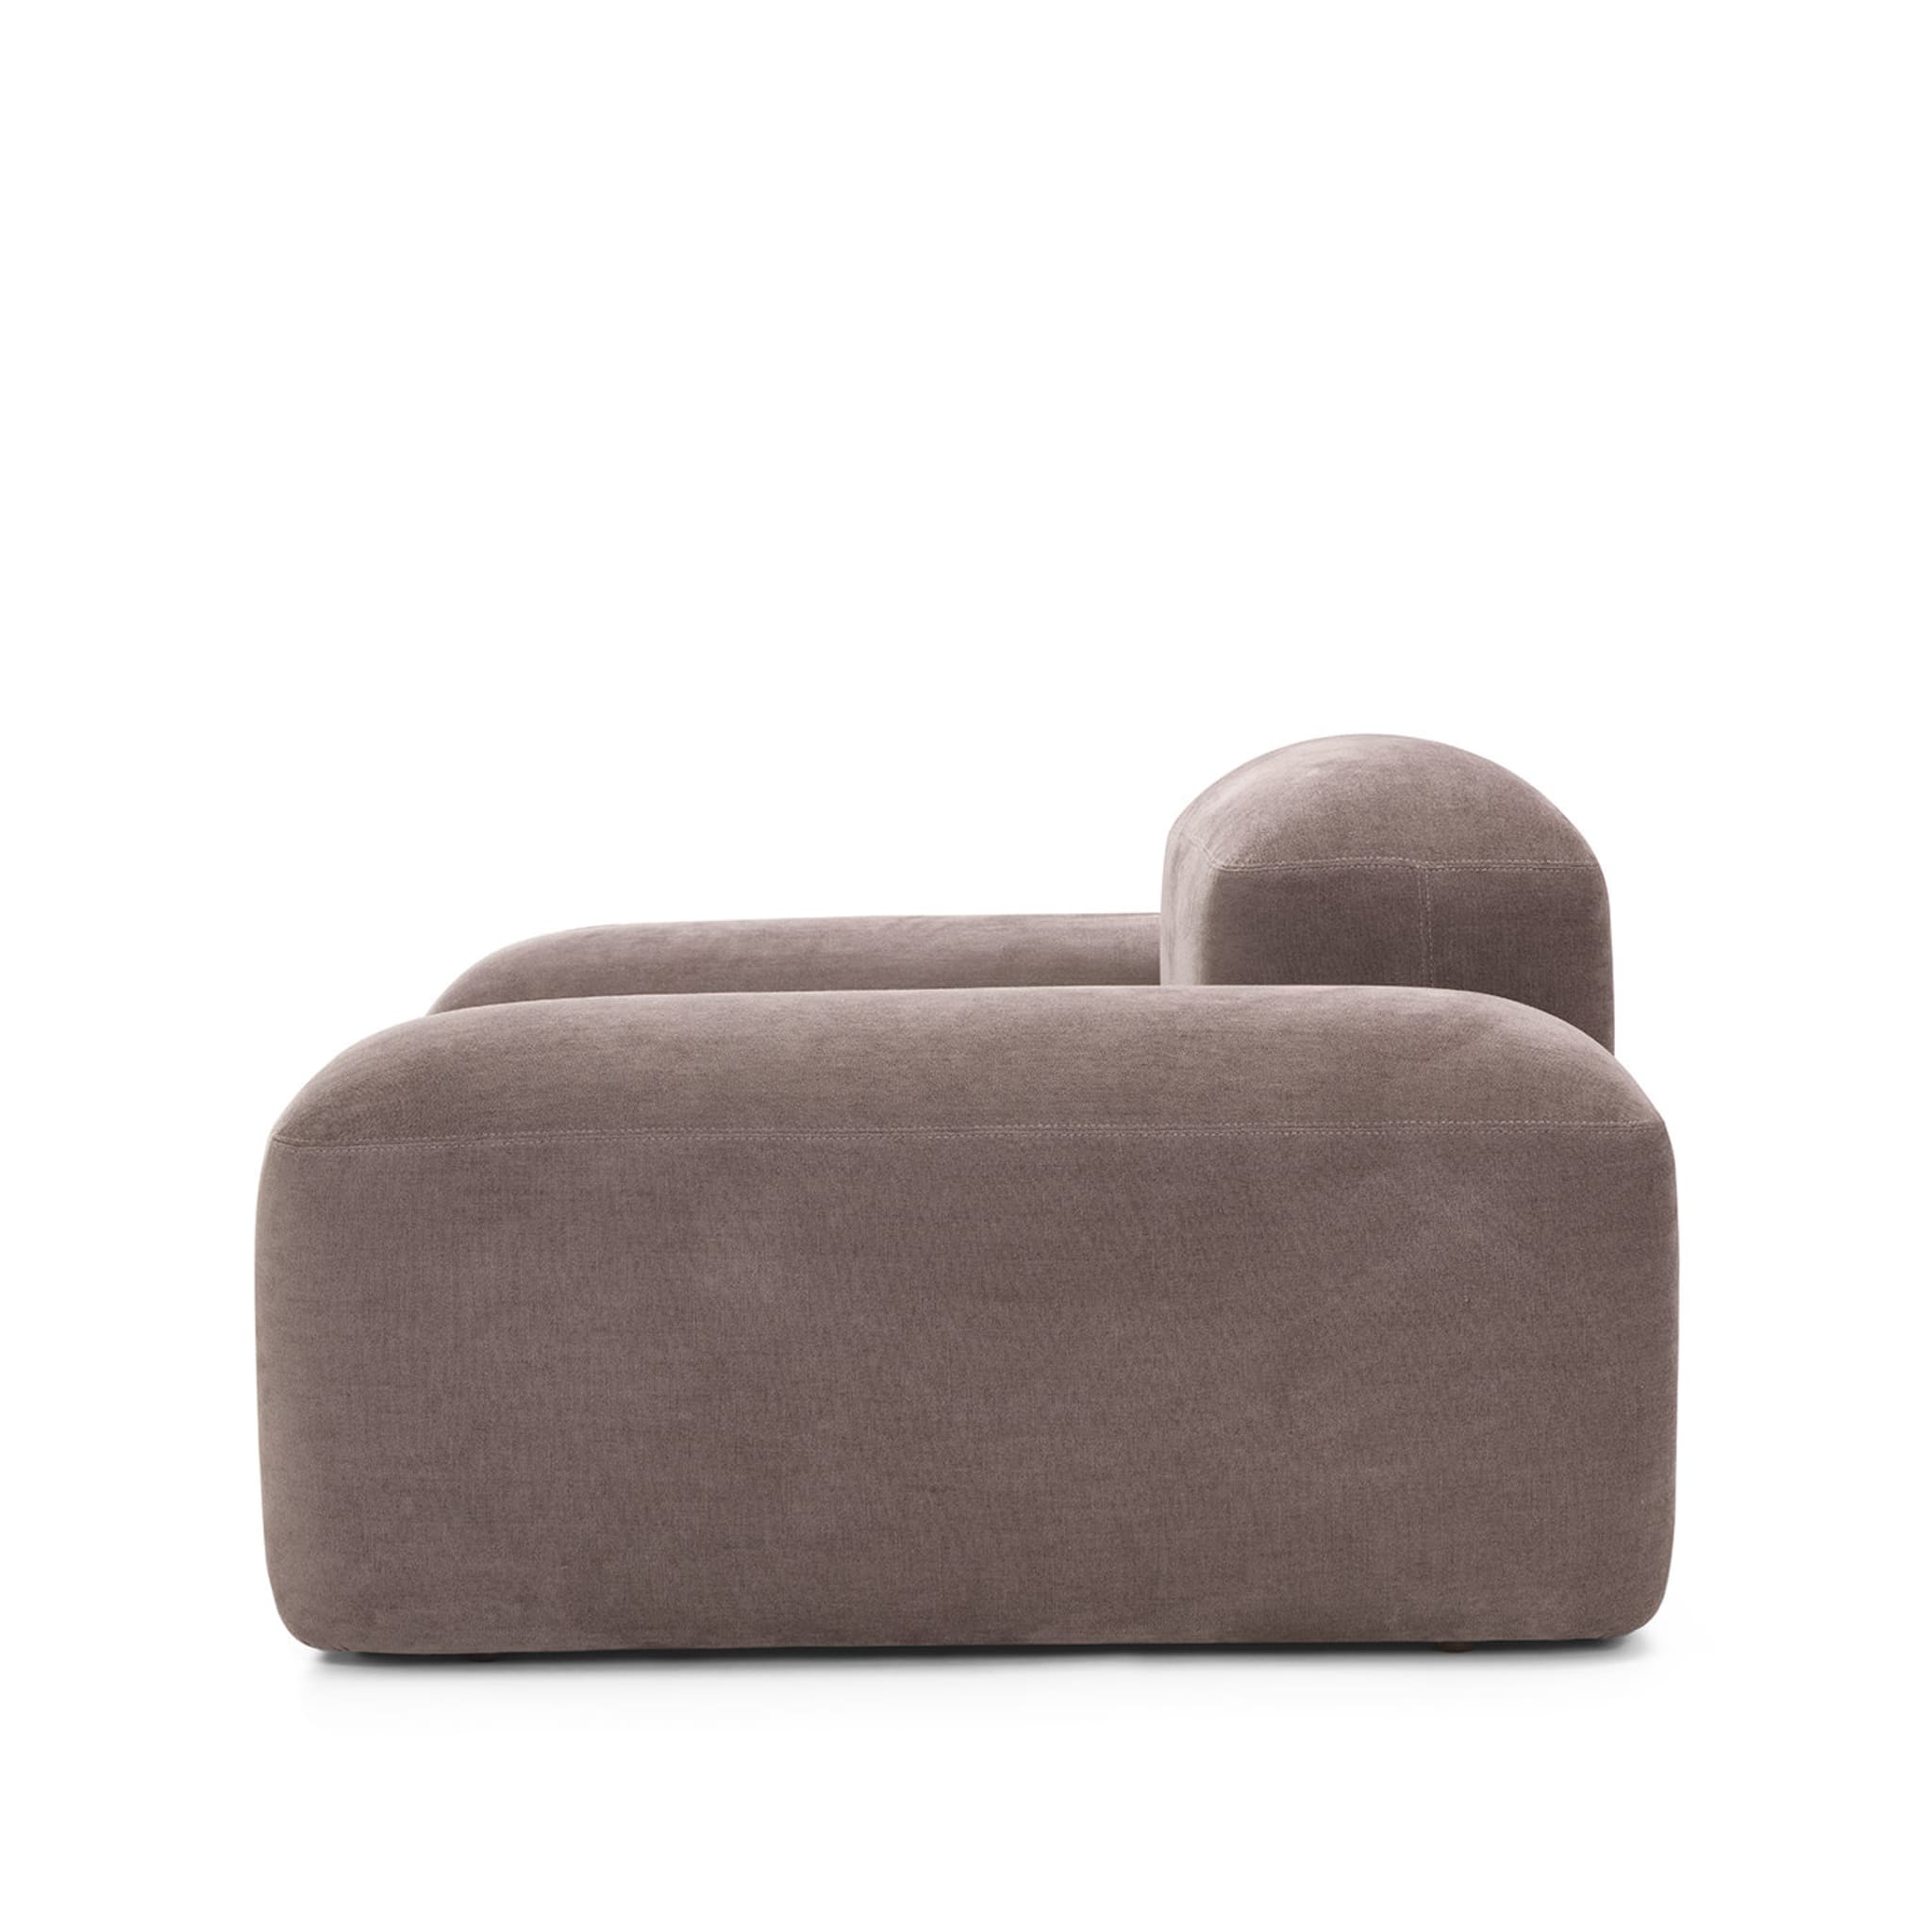 Lapis Pink Armchair By Anton Cristell and Emanuel Gargano - Alternative view 2